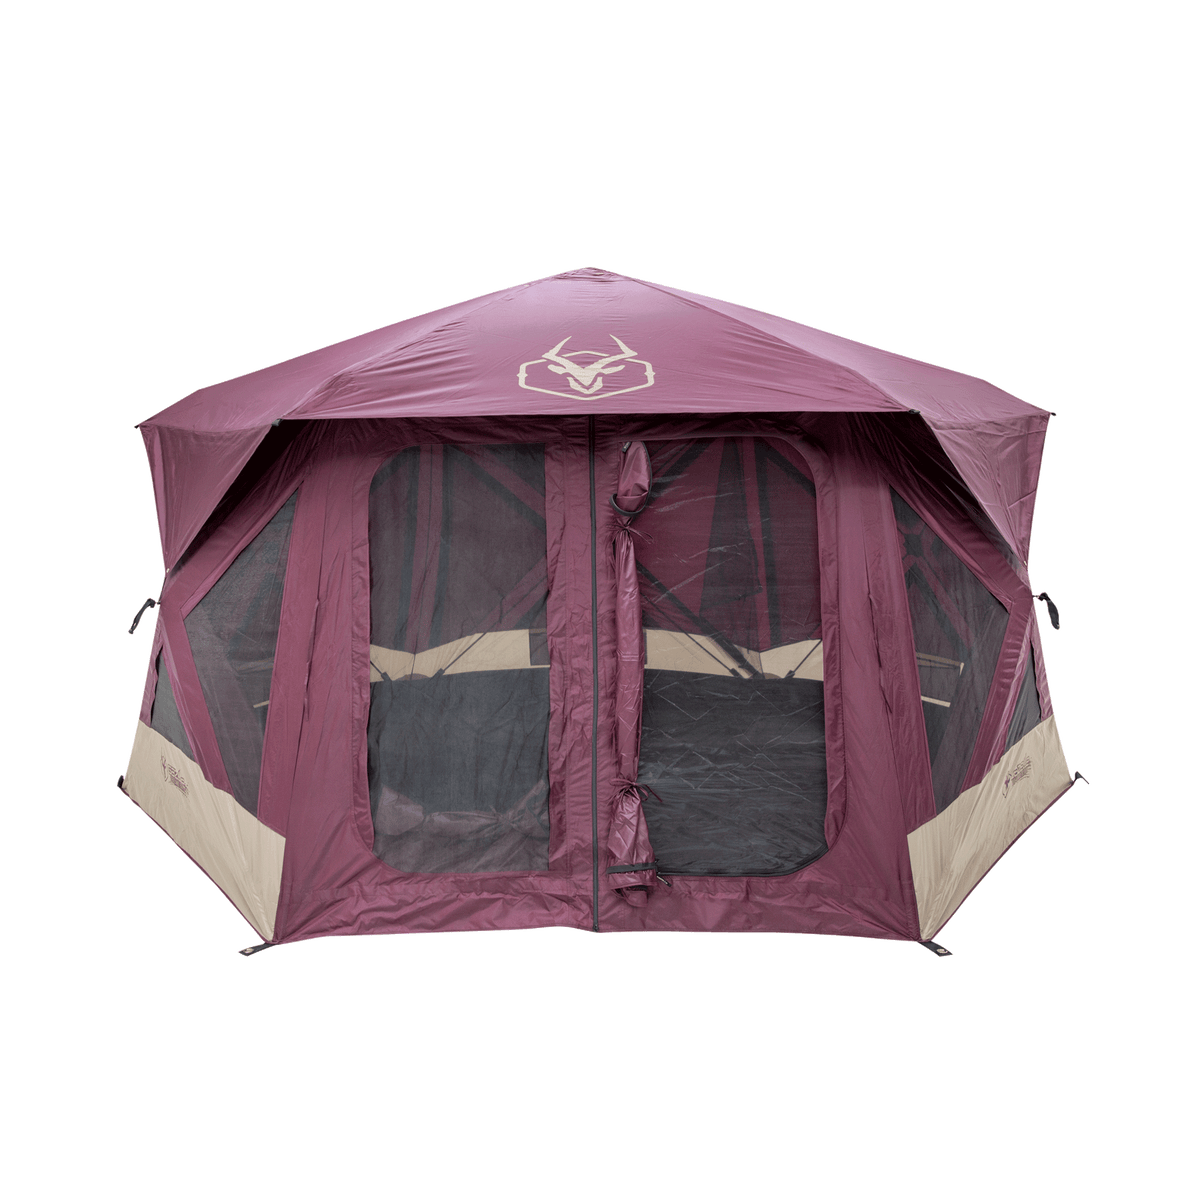 Gazelle Tents T-Hex Hub Tent Overland Edition, Easy 90 Second Set-Up,  Waterproof, UV Resistant, TriTech Mesh, Removable Floor, Ample Storage  Options, 